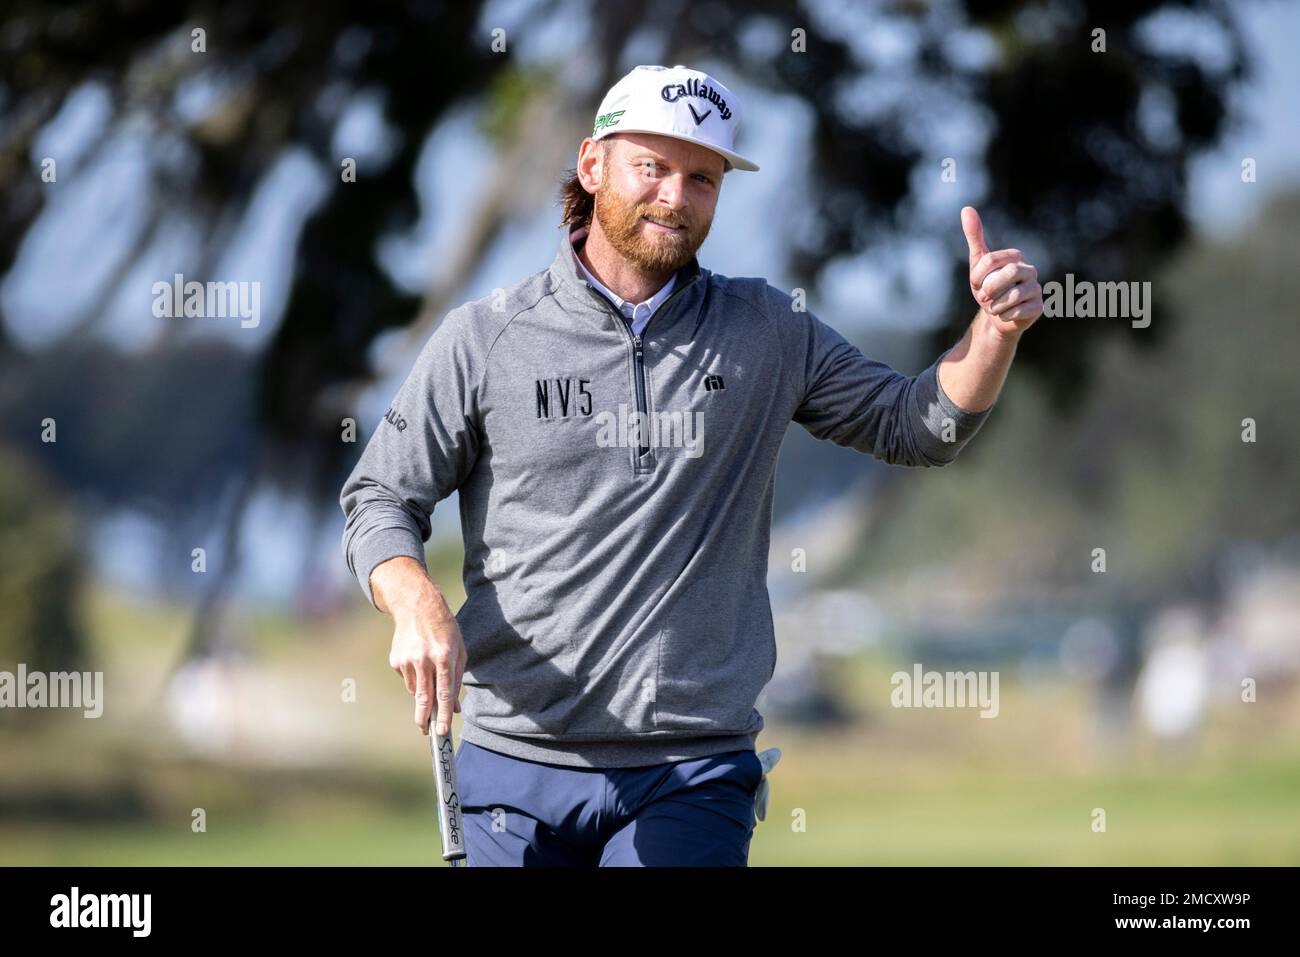 Tyler McCumber gives a thumbs-up to the crowd on the ninth hole after finishing 10-under par for the day during the final round of the RSM Classic golf tournament, Sunday, Nov